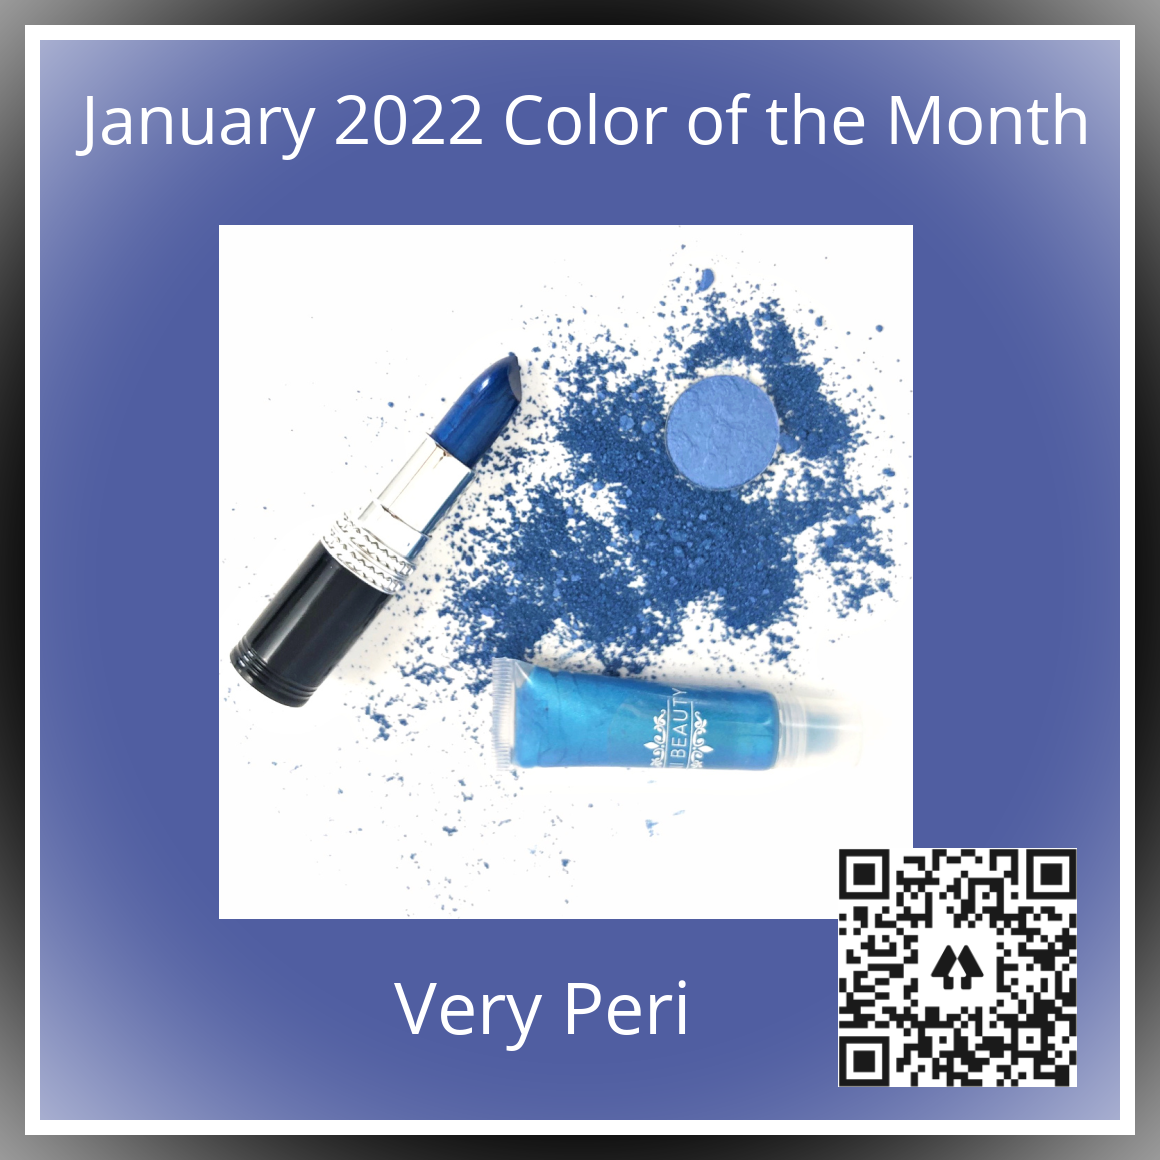 January 2022 Color of the Month is Very Peri